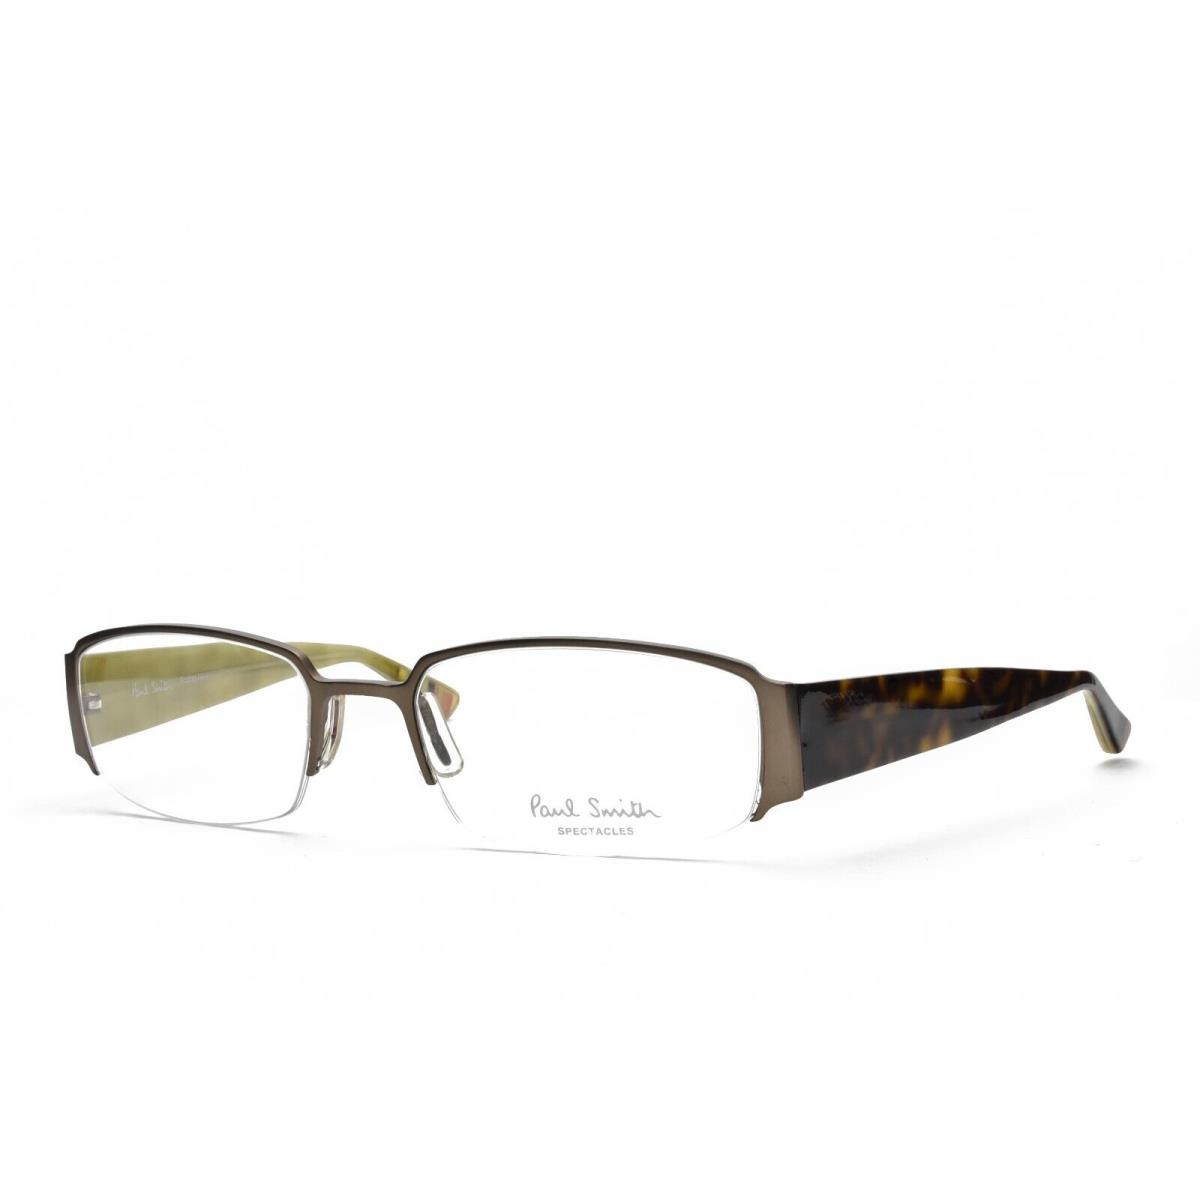 Paul Smith PS 197 W Eyeglasses Frames Only 53-18-145